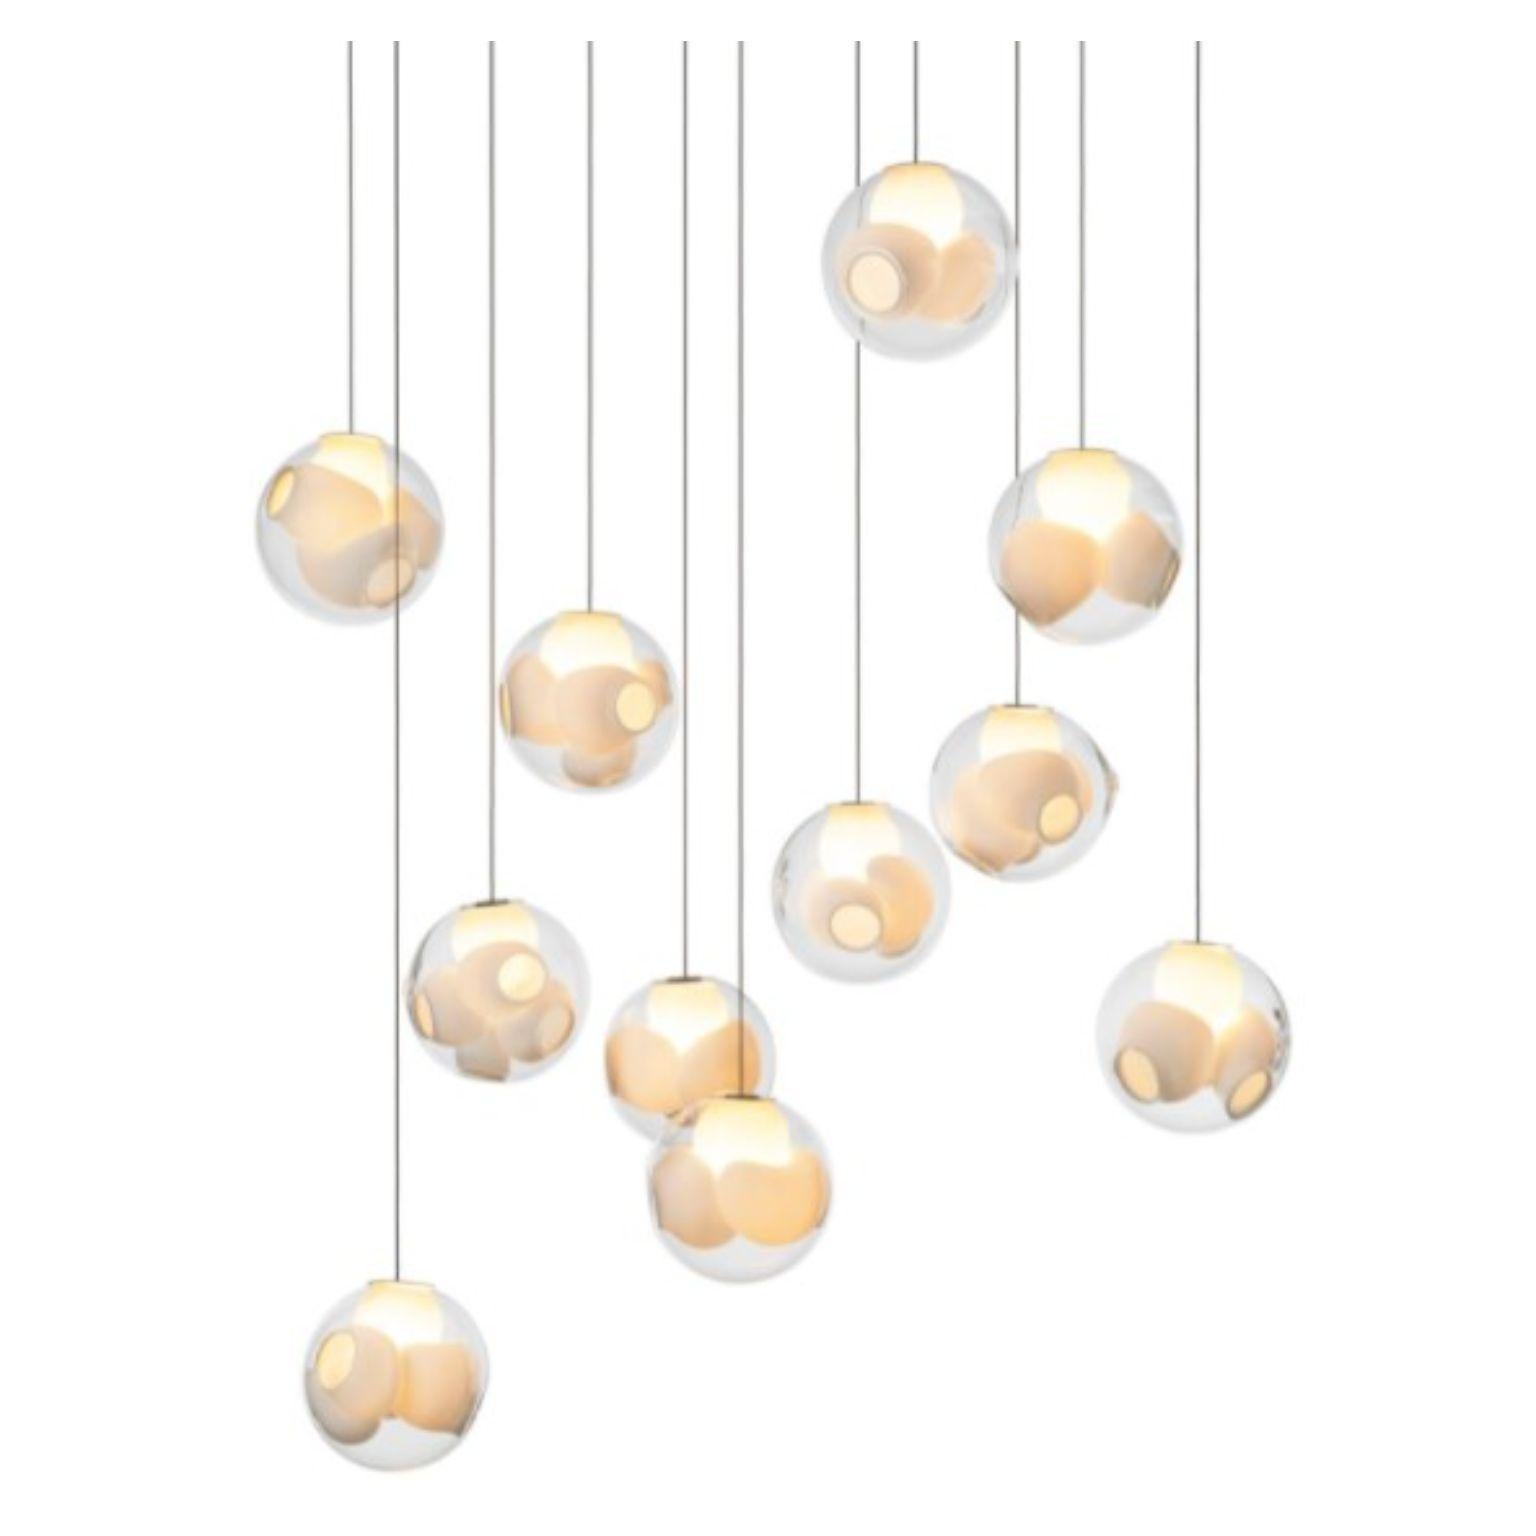 38.11 Pendant by Bocci
Dimensions: D100 x W37 x H300 cm
Materials: white powder coated rectangular canopy
Weight: 37 kg
Also available in different dimensions and models.

All our lamps can be wired according to each country. If sold to the